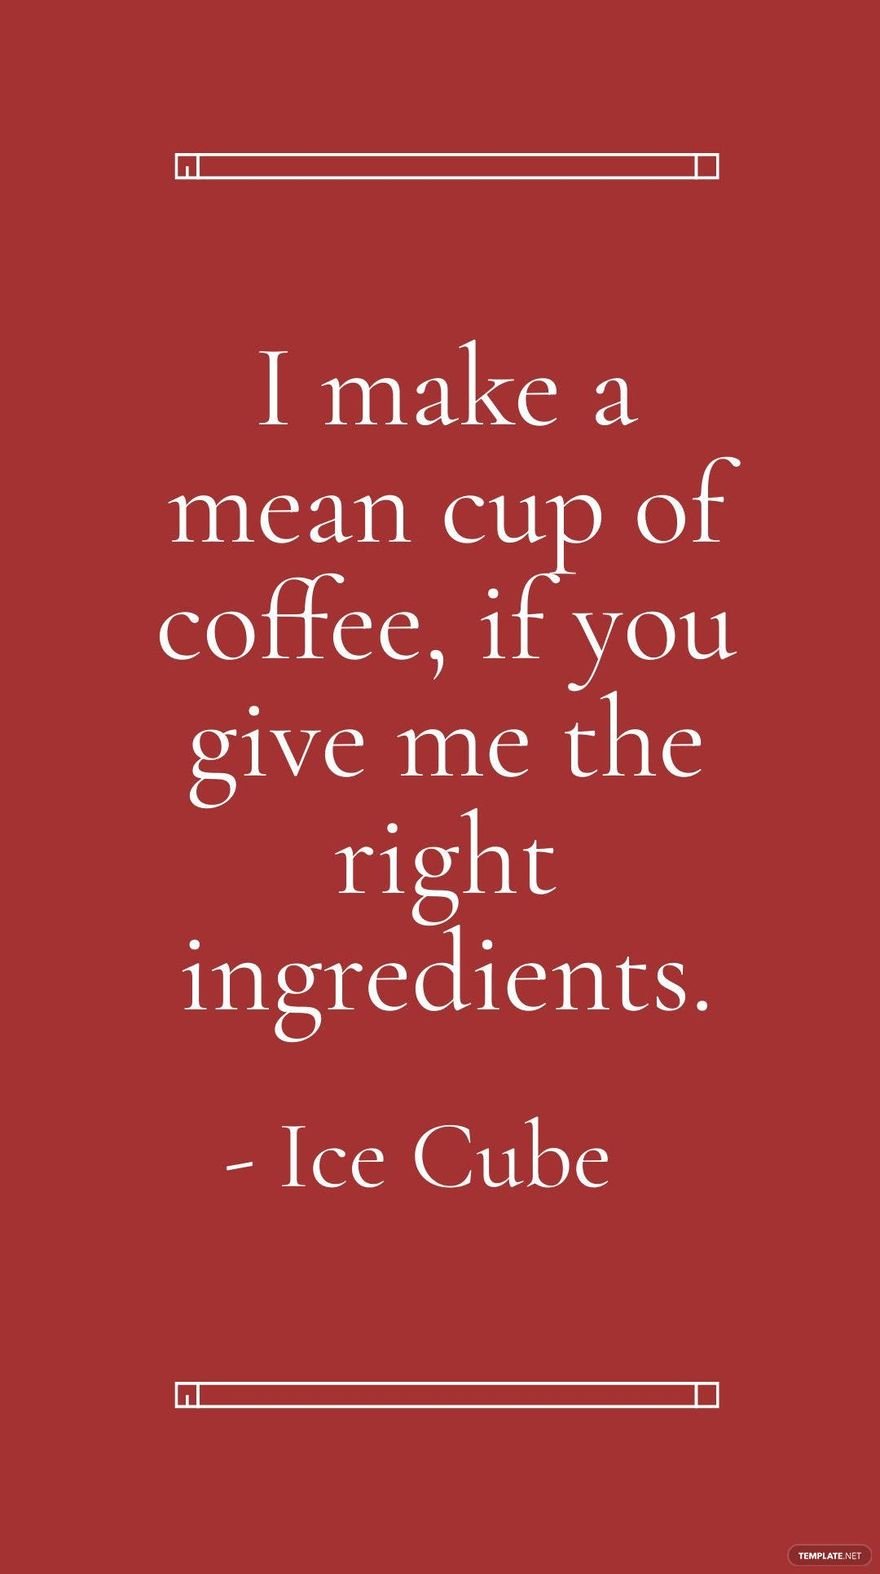 Ice Cube - I make a mean cup of coffee, if you give me the right ingredients.